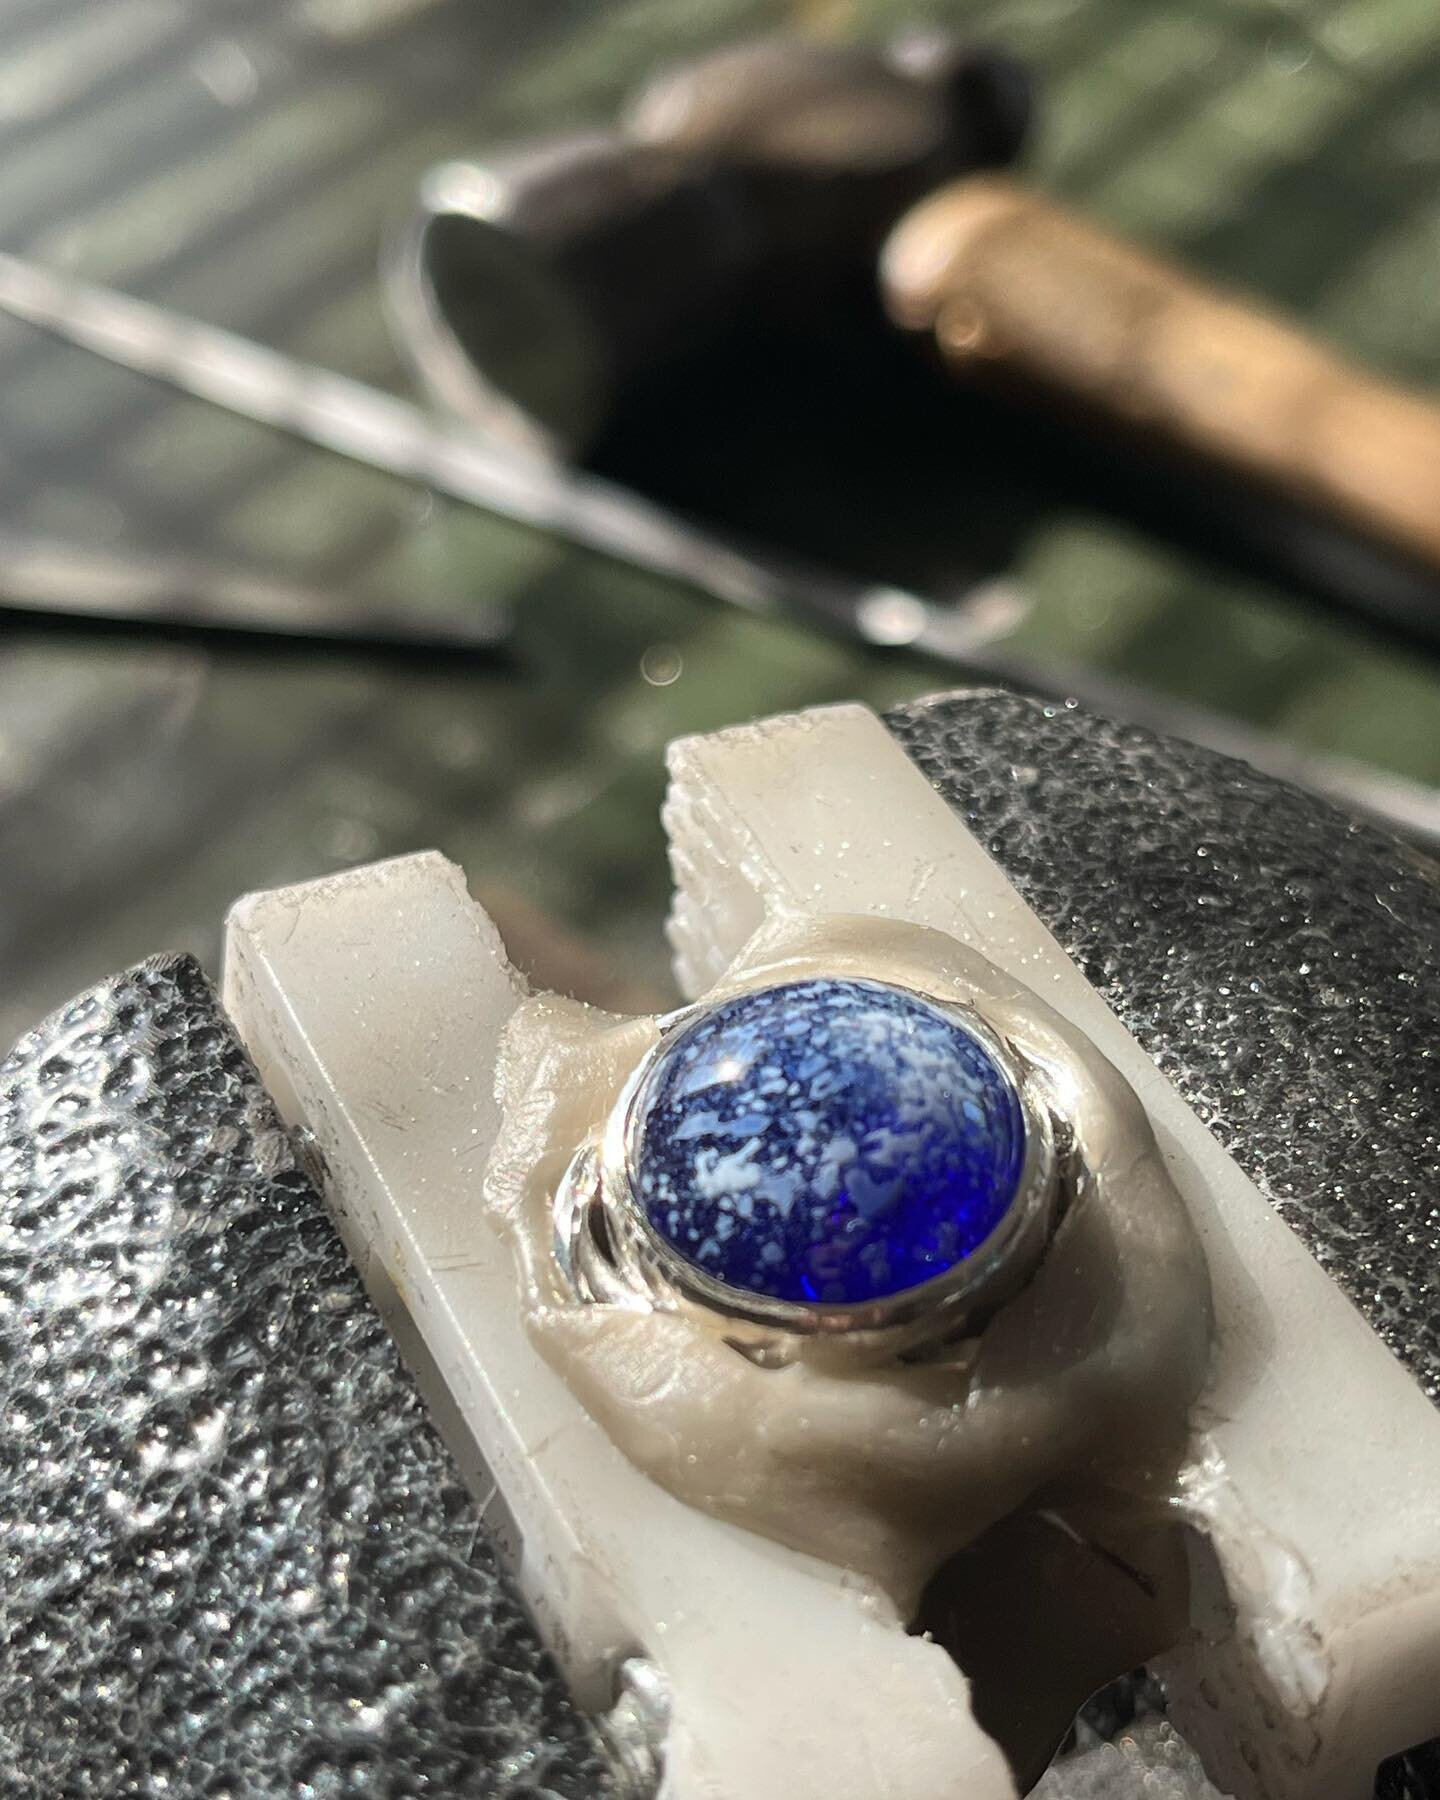 Setting a cobalt memorial stone today. Always a classic color choice. 💙 #tomorrowsheirloom
.
.
.
.
#cremationjewelry #celebratelife #honor #memorial #loss #love #grief #griefjourney #griefawareness #griefsupport #mourningjewelry #cremation #urn #rem